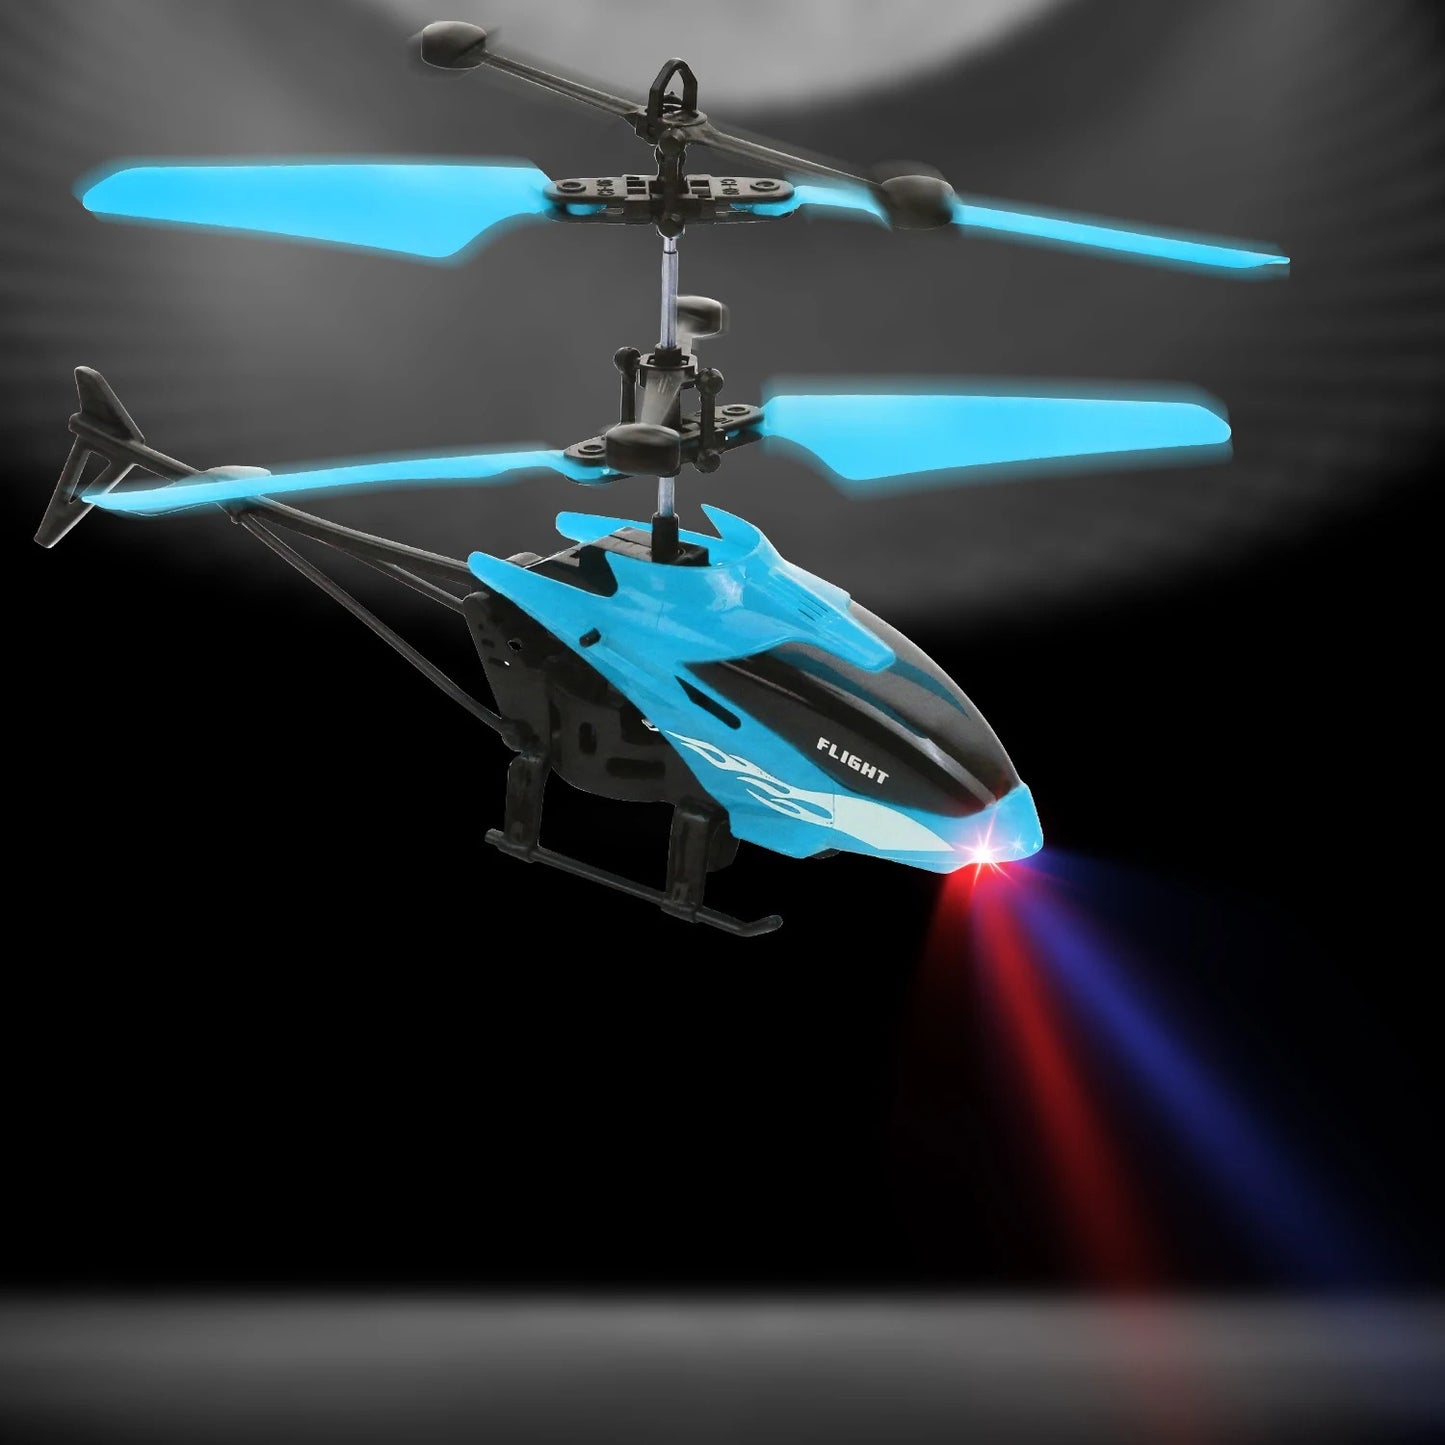 Remote-Controlled Mini Helicopter with Illumination: Durable and Impact-Resistant for Interactive Flight